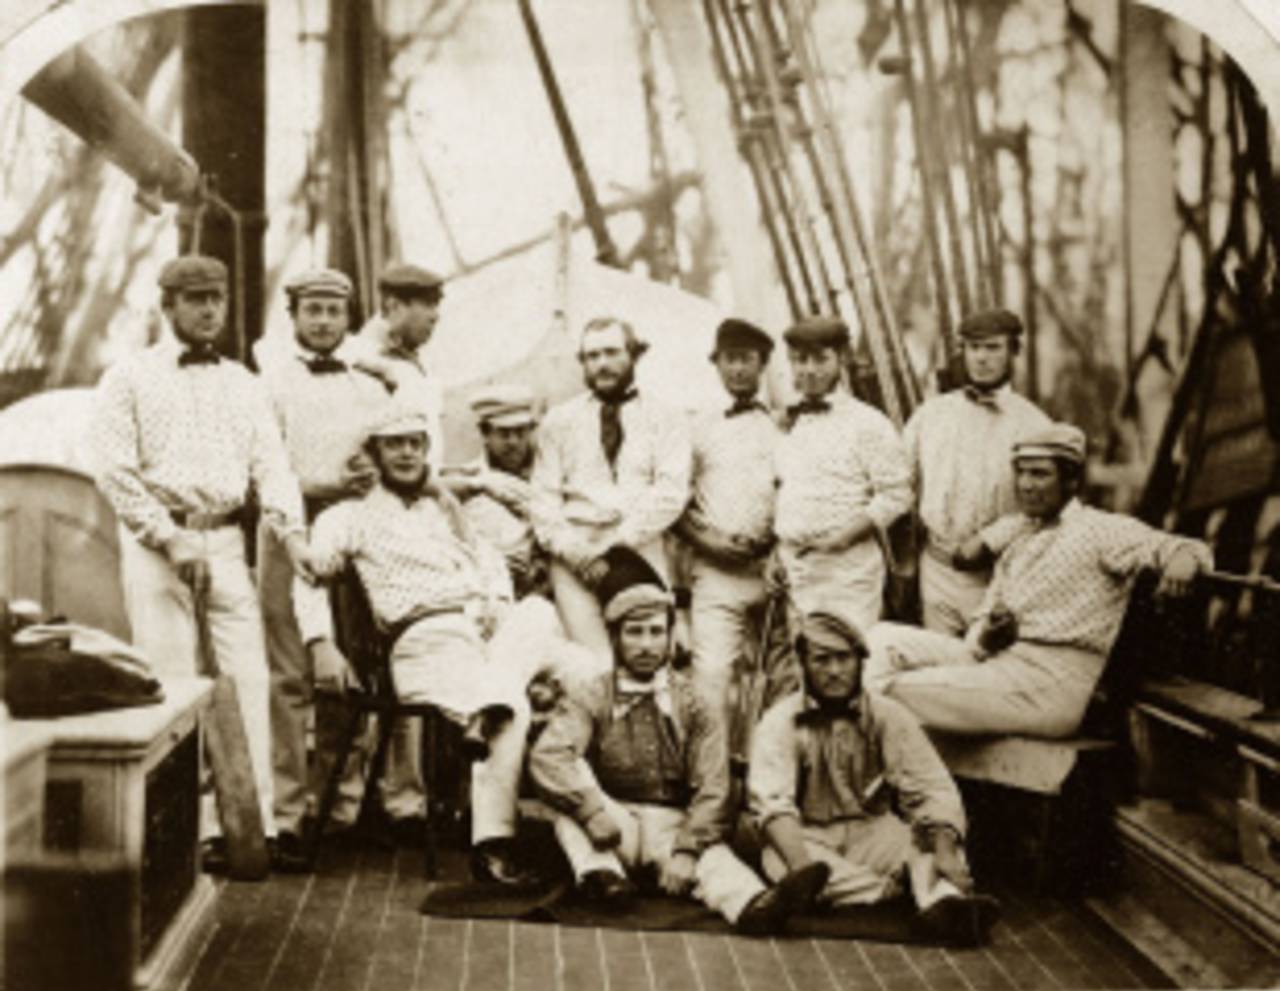 England's 12 Champion Cricketers on board a ship at Liverpool bound for America in September 1859. Back row (from left to right): Bob Carpenter, William Caflyn, Tom Lockyer, John Wisden (seated), HH Stephenson, George Parr, John Grundy, Julius Cesar, Tom Hayward and John Jackson. Seated at front: Alfred Diver and John Lillywhite.